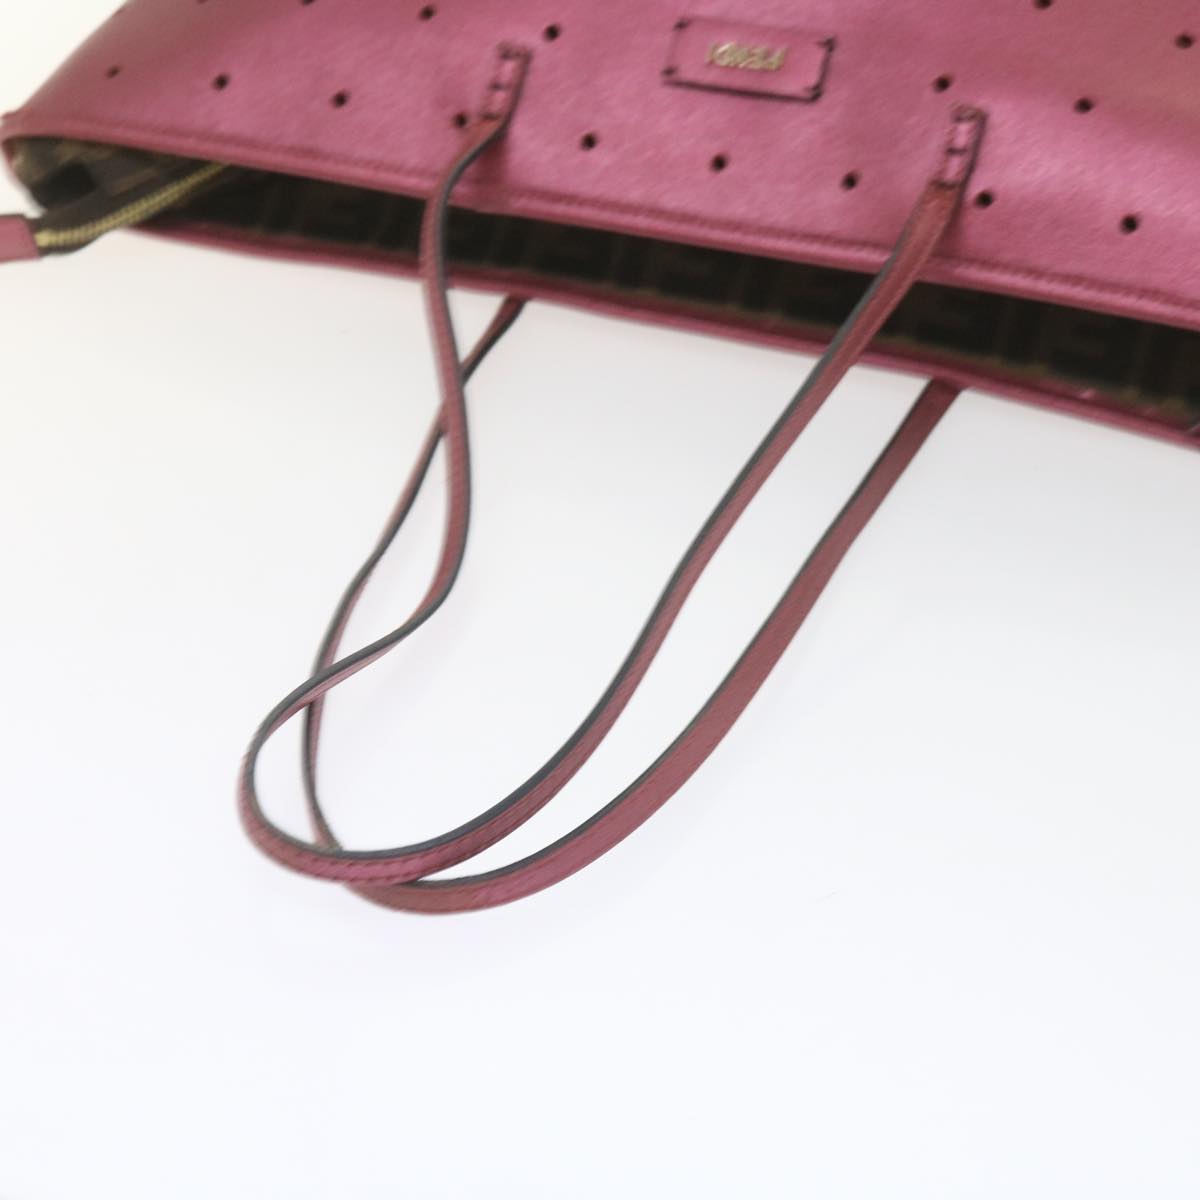 FENDI Tote Bag PVC Leather Pink Auth bs10480